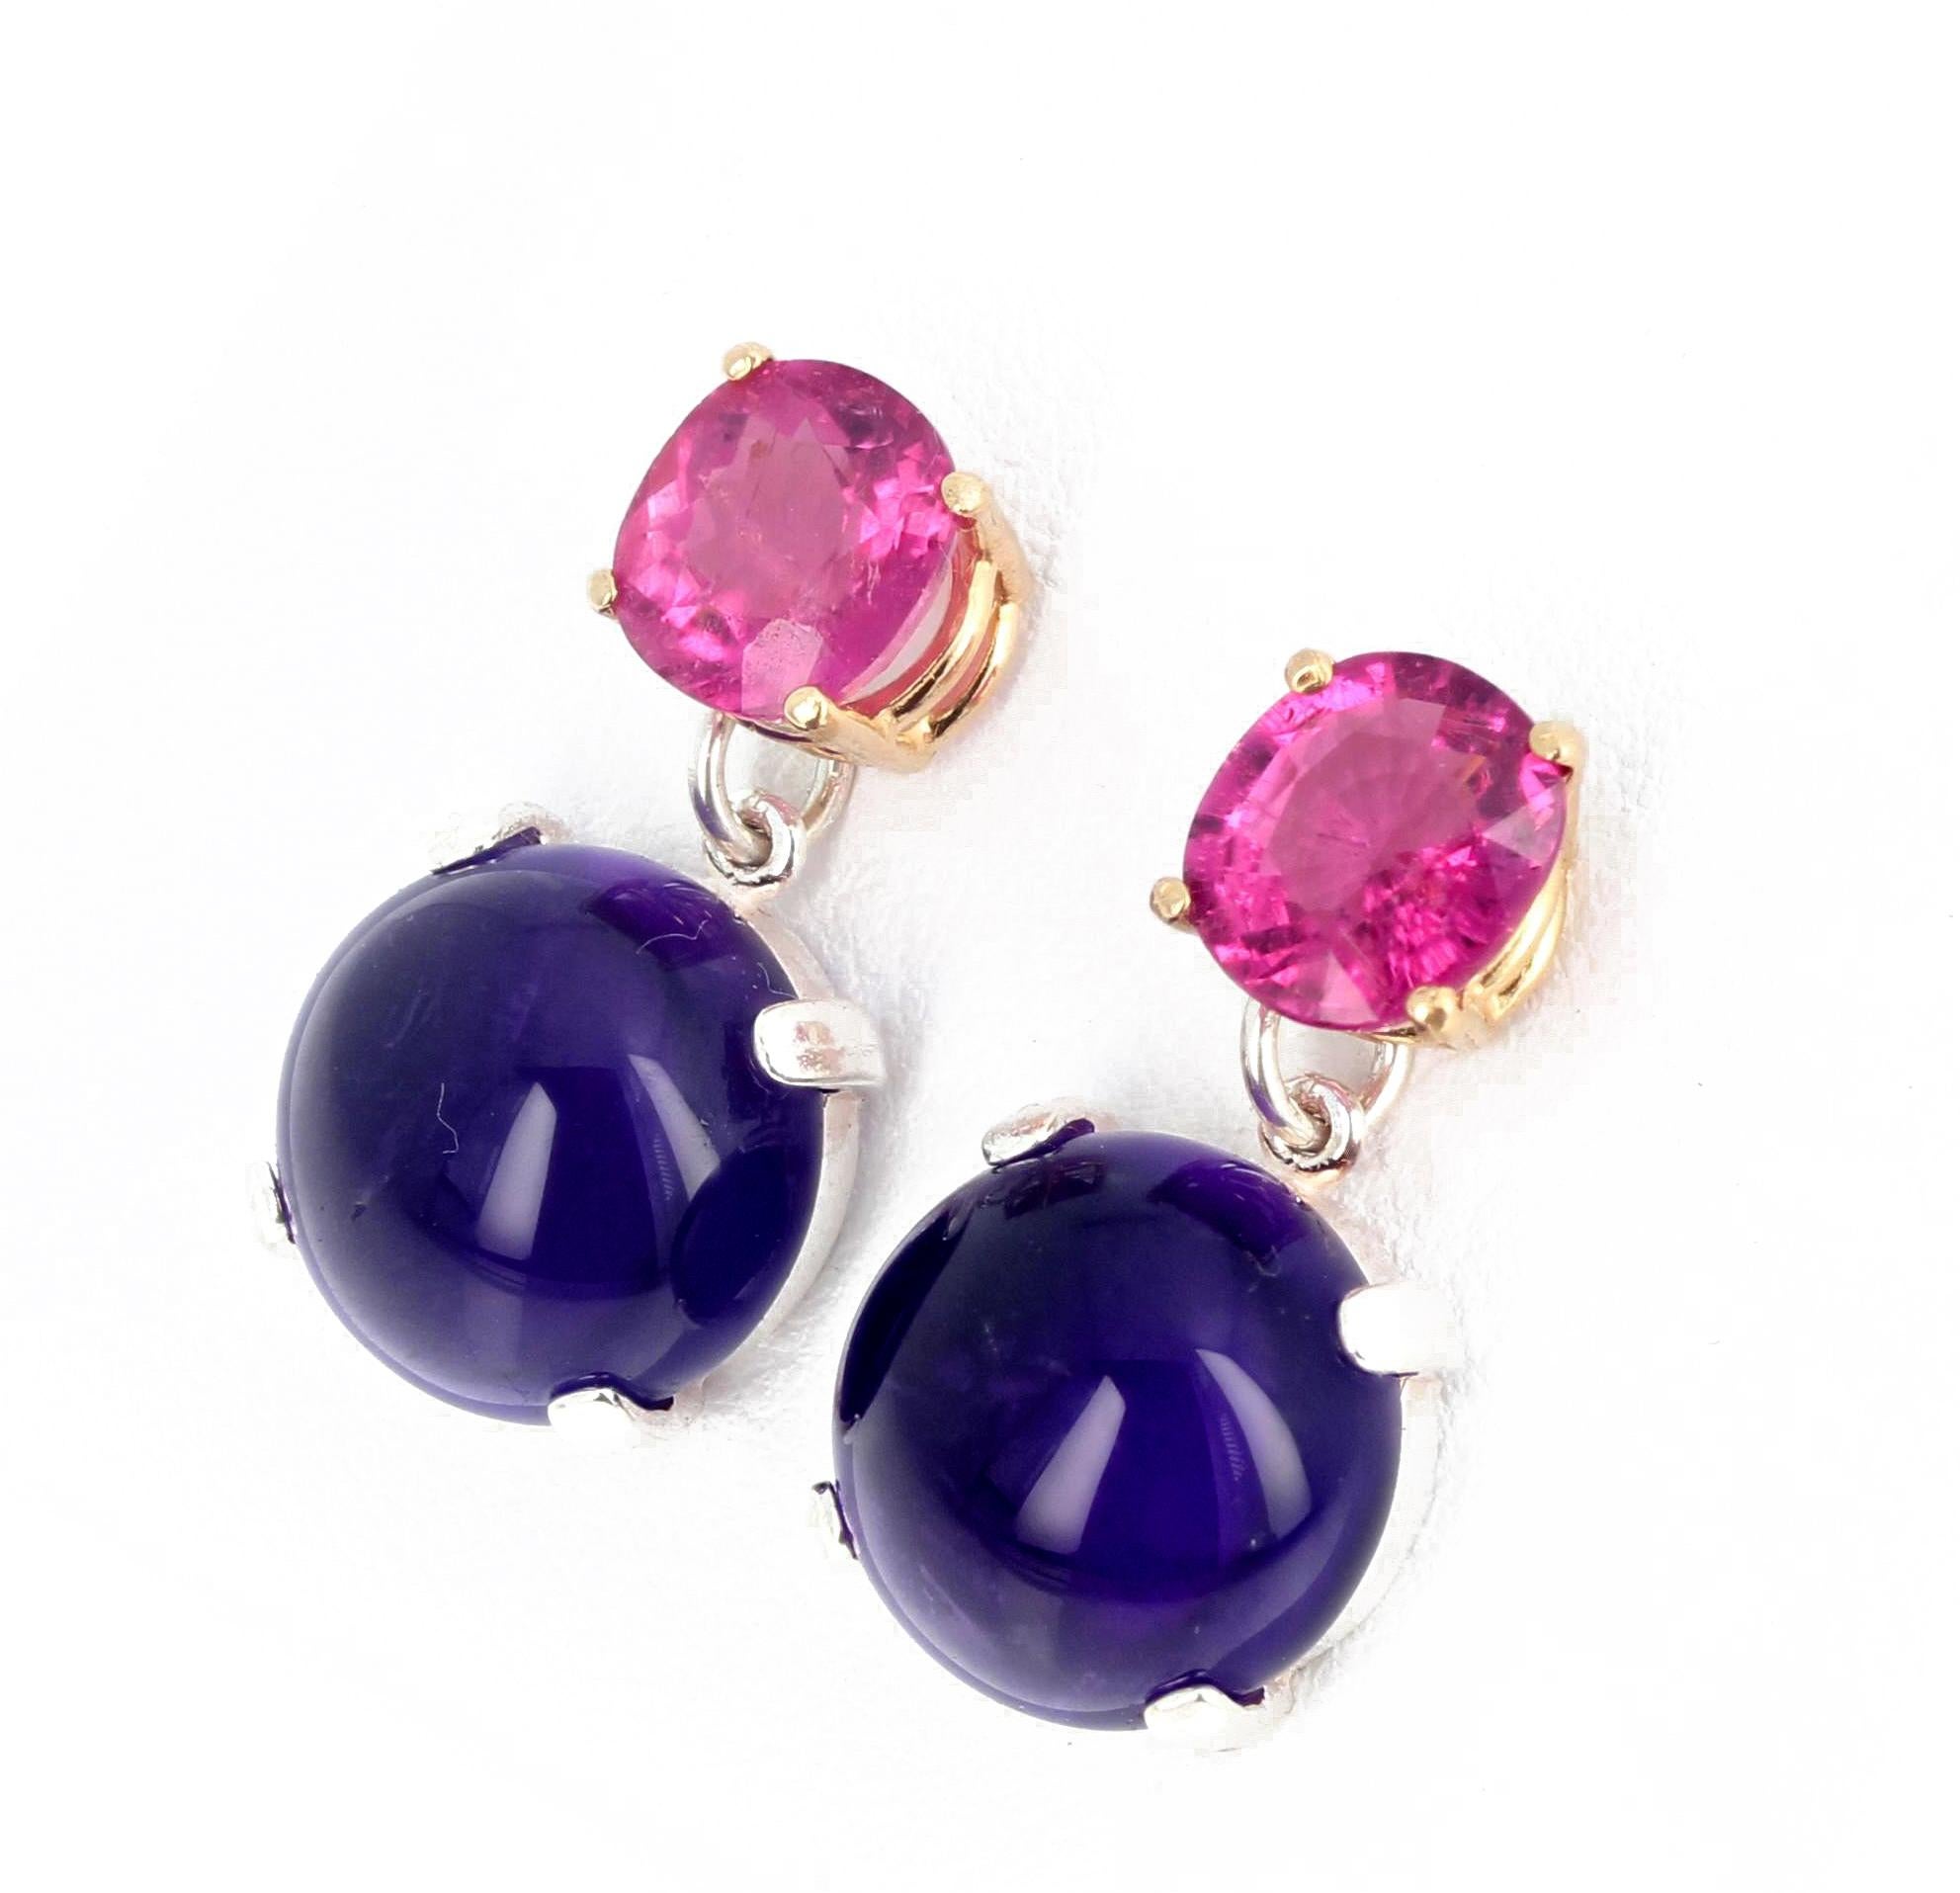 Mixed Cut AJD Stunning 3.9 Cts Pink Tourmaline & 42.63 Cts Amethyst Stud Earrings